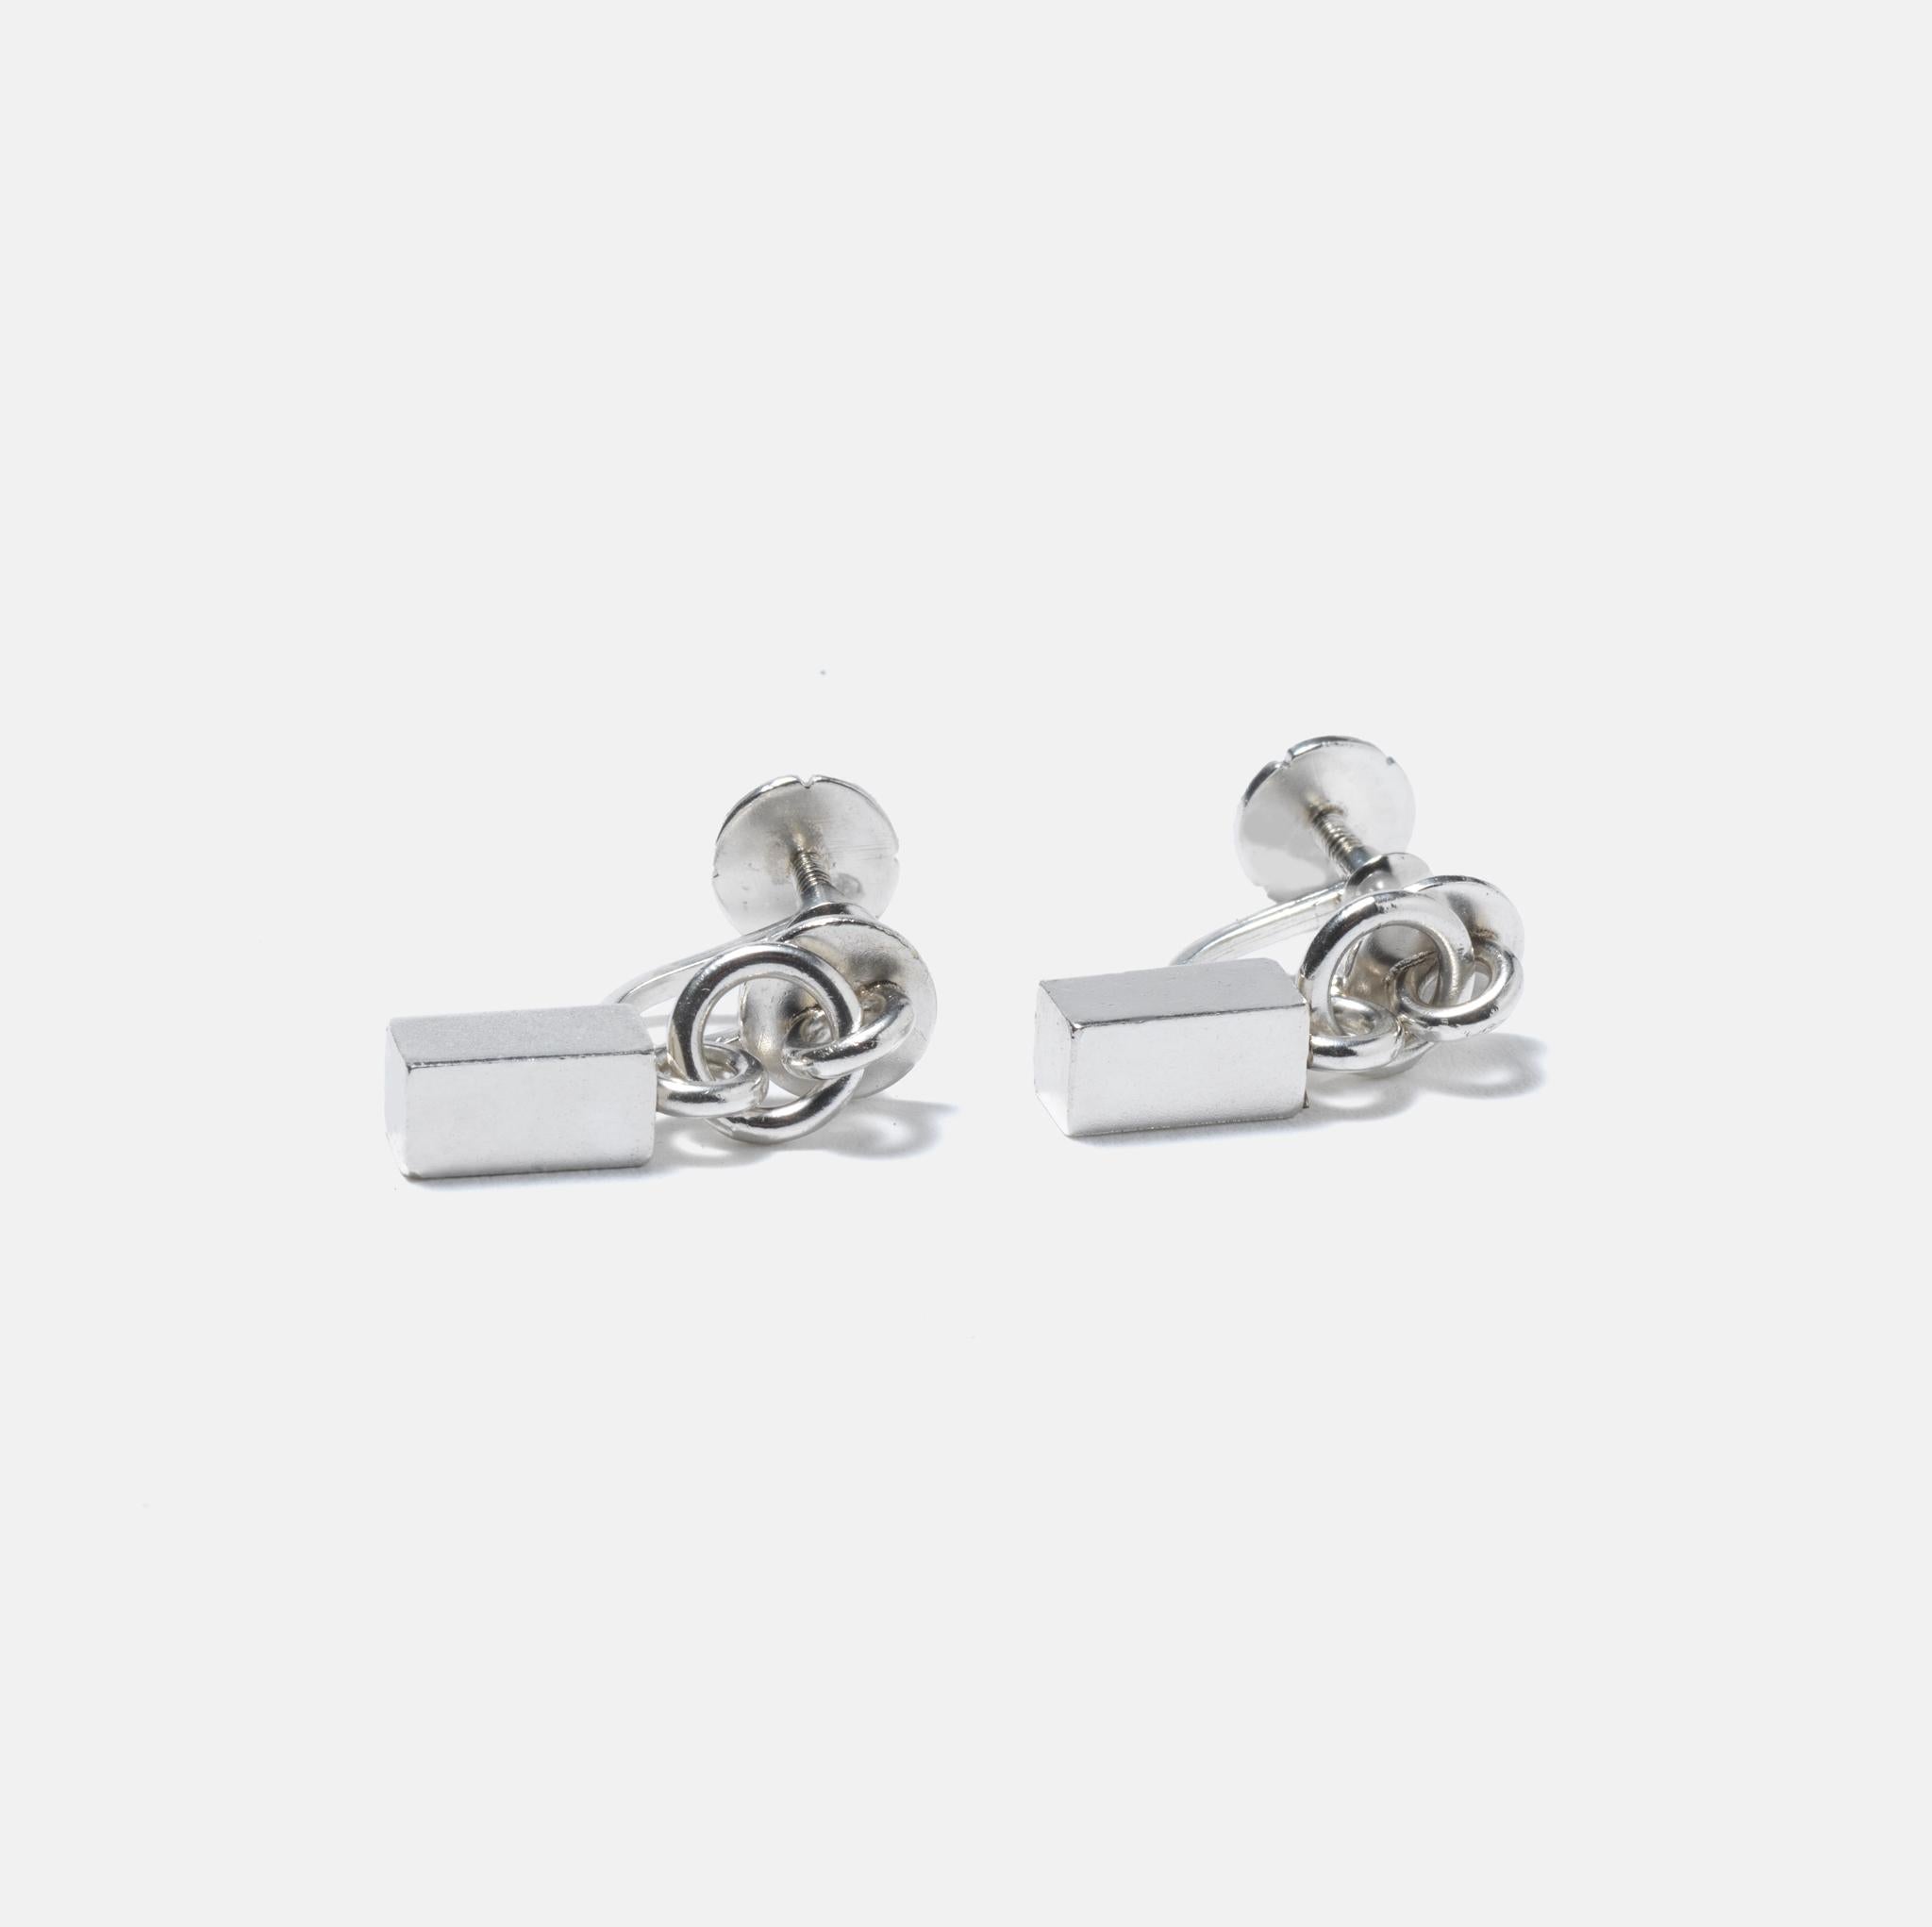 A pair of silver earrings made by Wiwen Nilsson, the most recogniced Swedish silversmith ever. This is a typical design for him using geometrical shapes for his jewelry.
Even the stamps are beautifully made, he was a perfectionist in all small